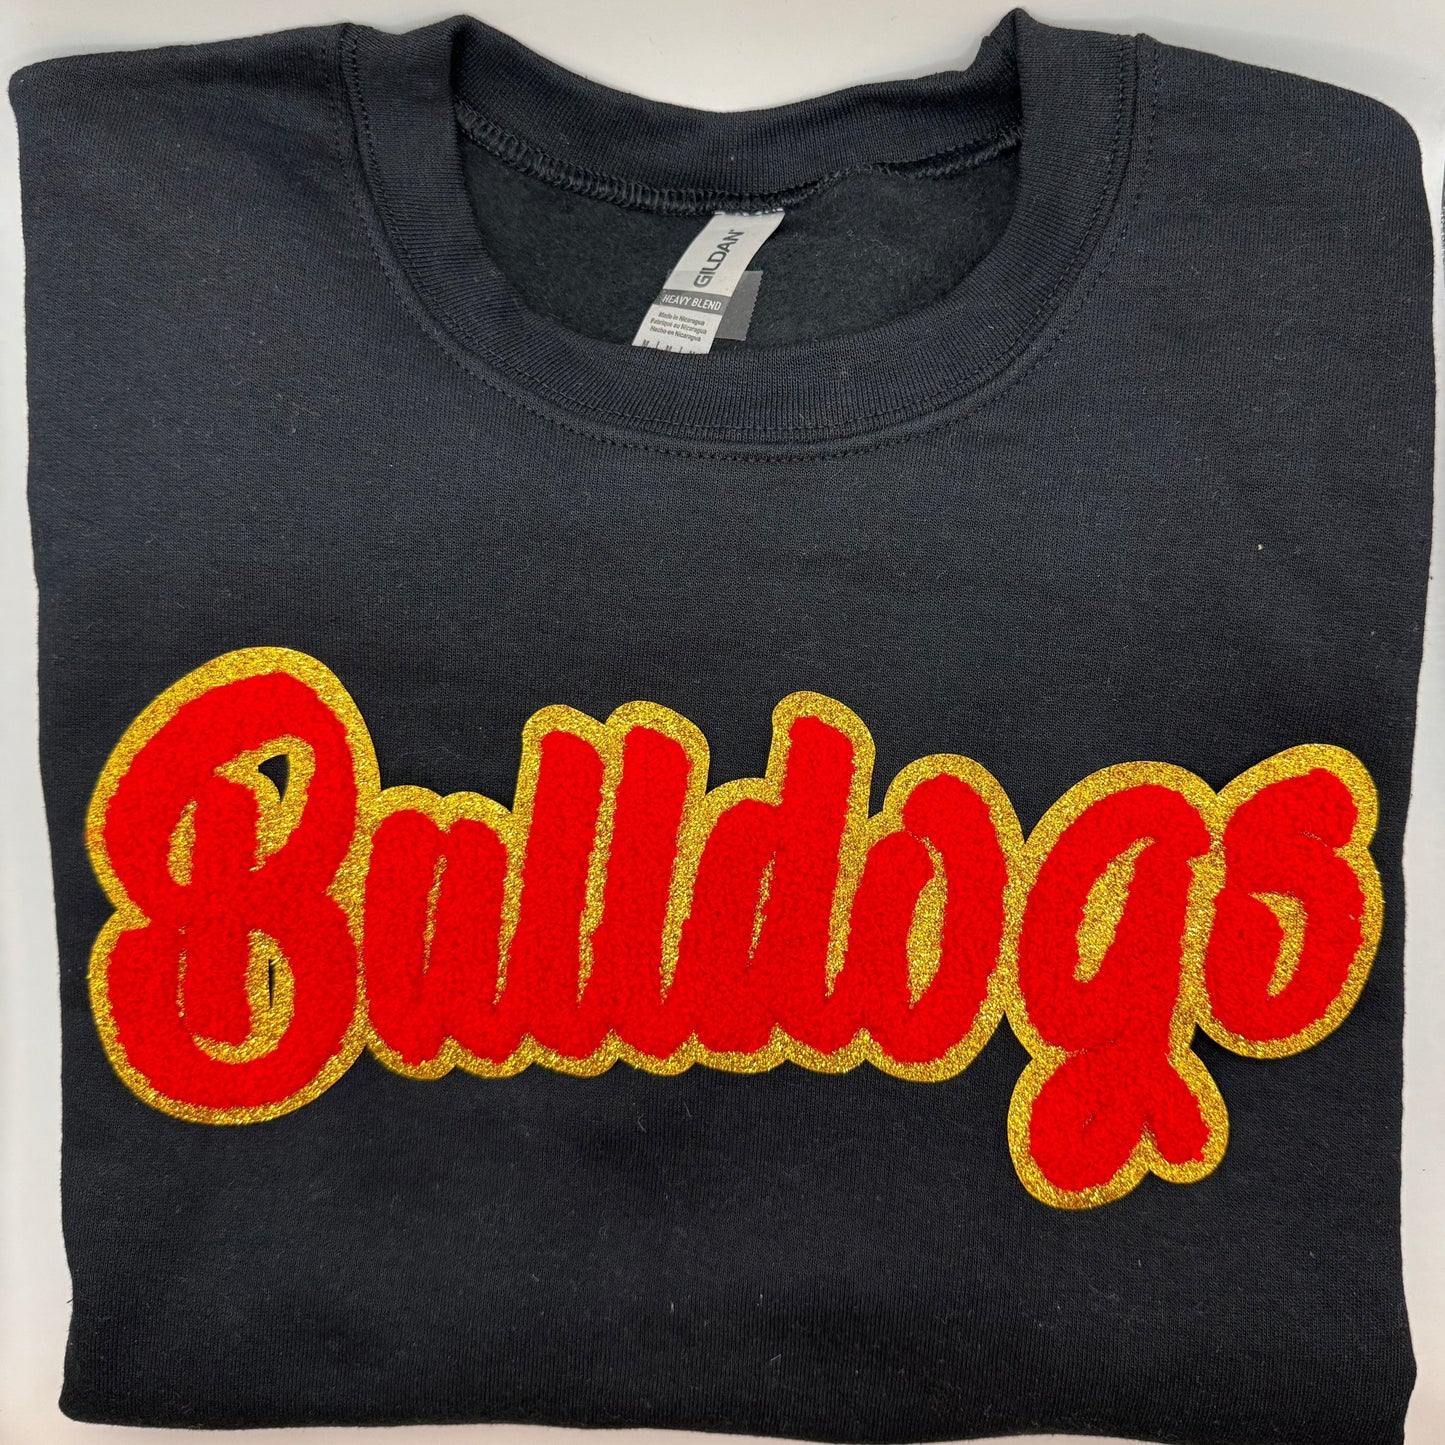 Bulldogs Chenille Patch in a Women's Unisex Crewneck  (see pictures for Sweatshirt Style)